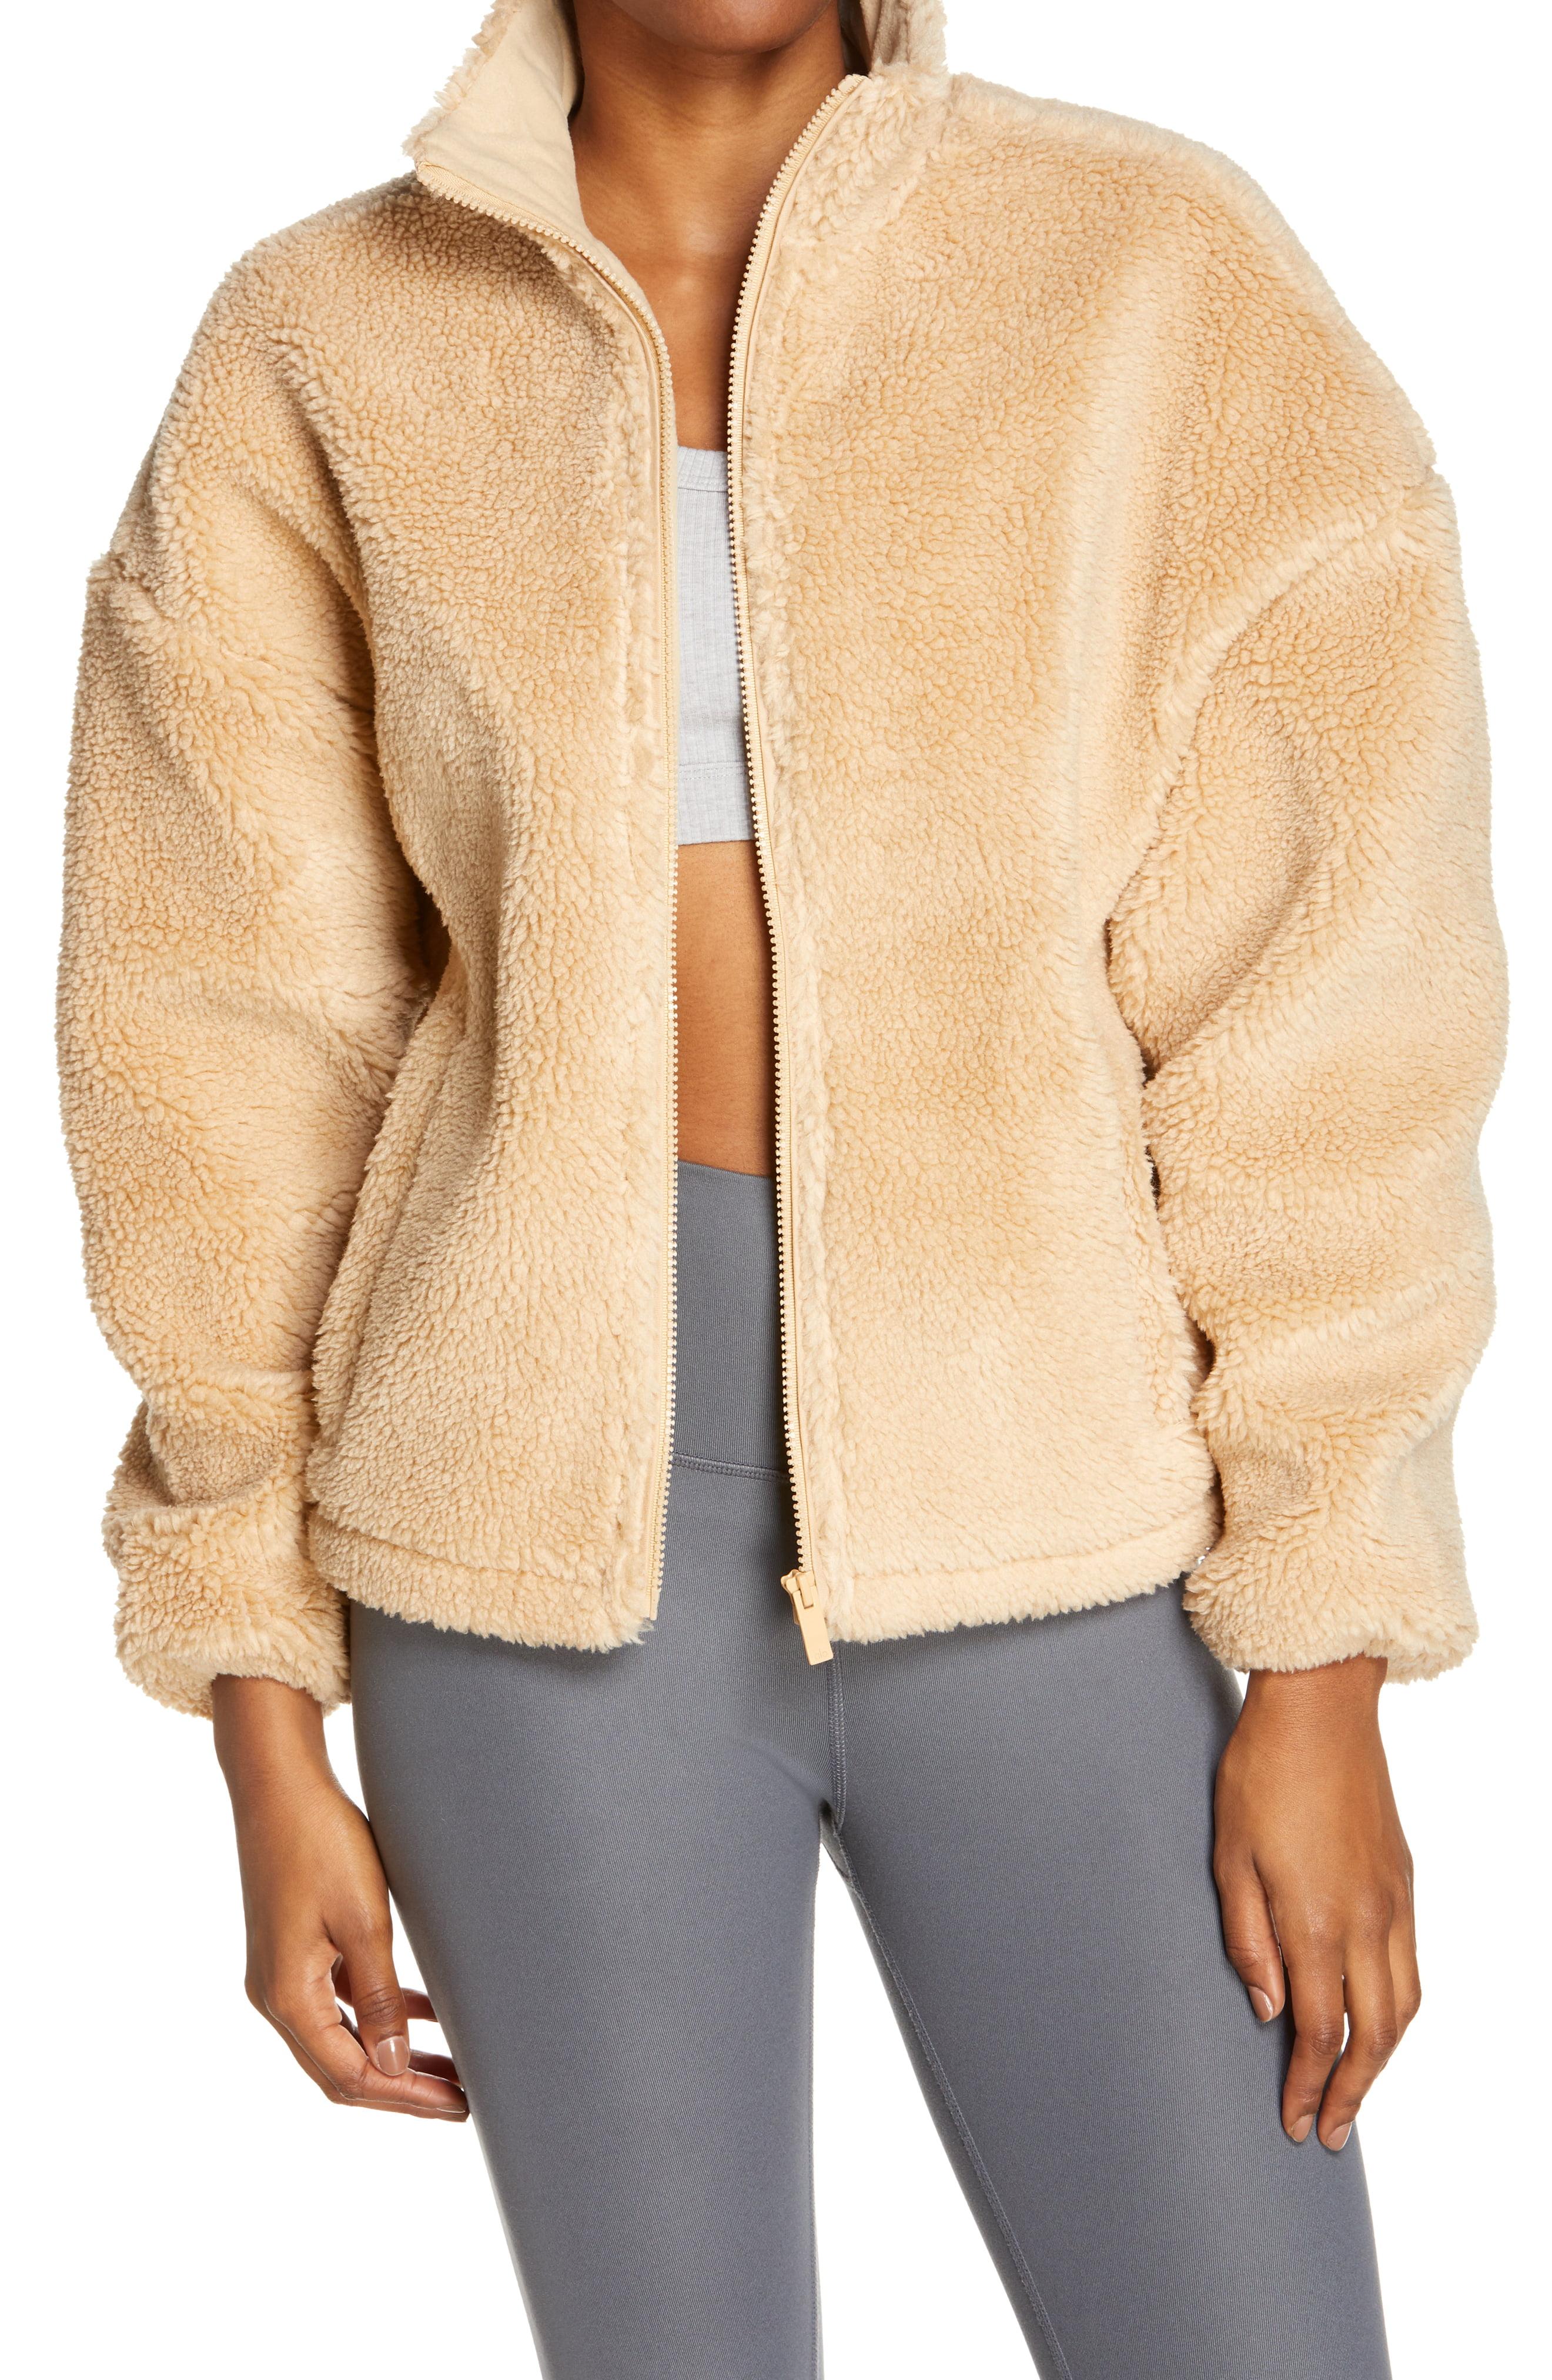 Alo Yoga Flurry Faux Fur Jacket in Camel (Natural) - Lyst